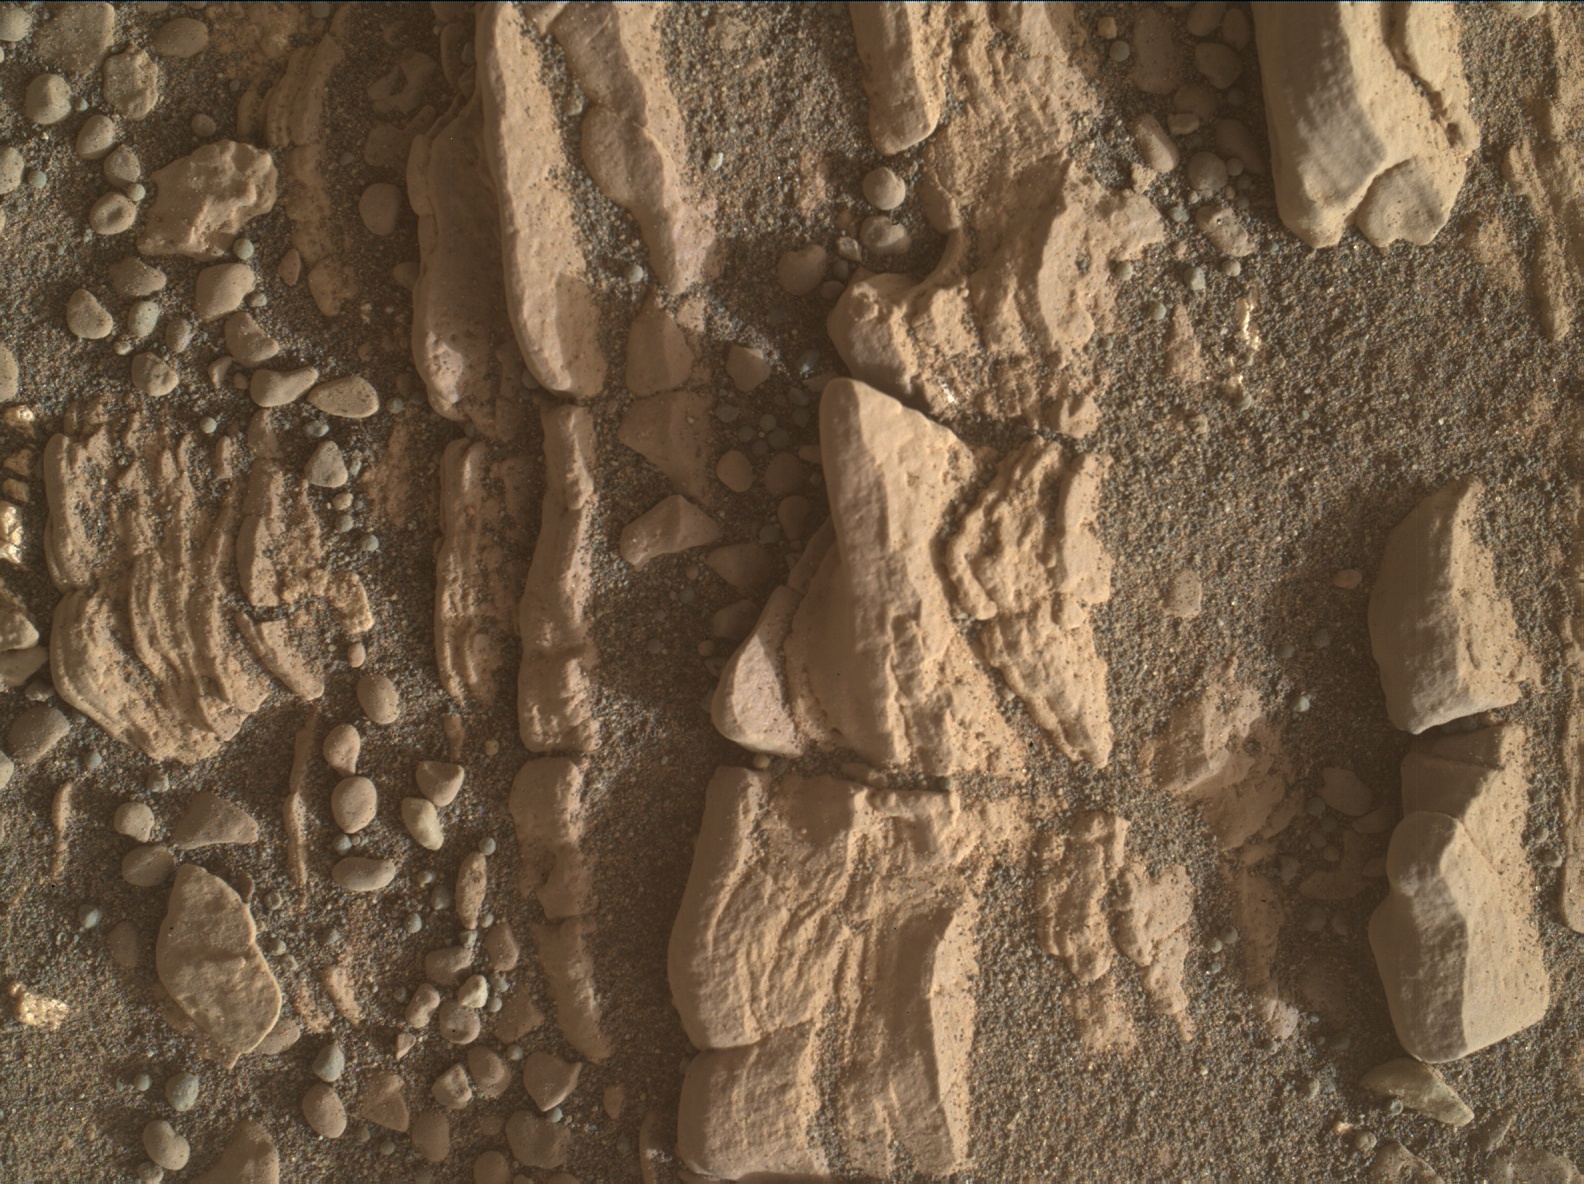 Nasa's Mars rover Curiosity acquired this image using its Mars Hand Lens Imager (MAHLI) on Sol 2427